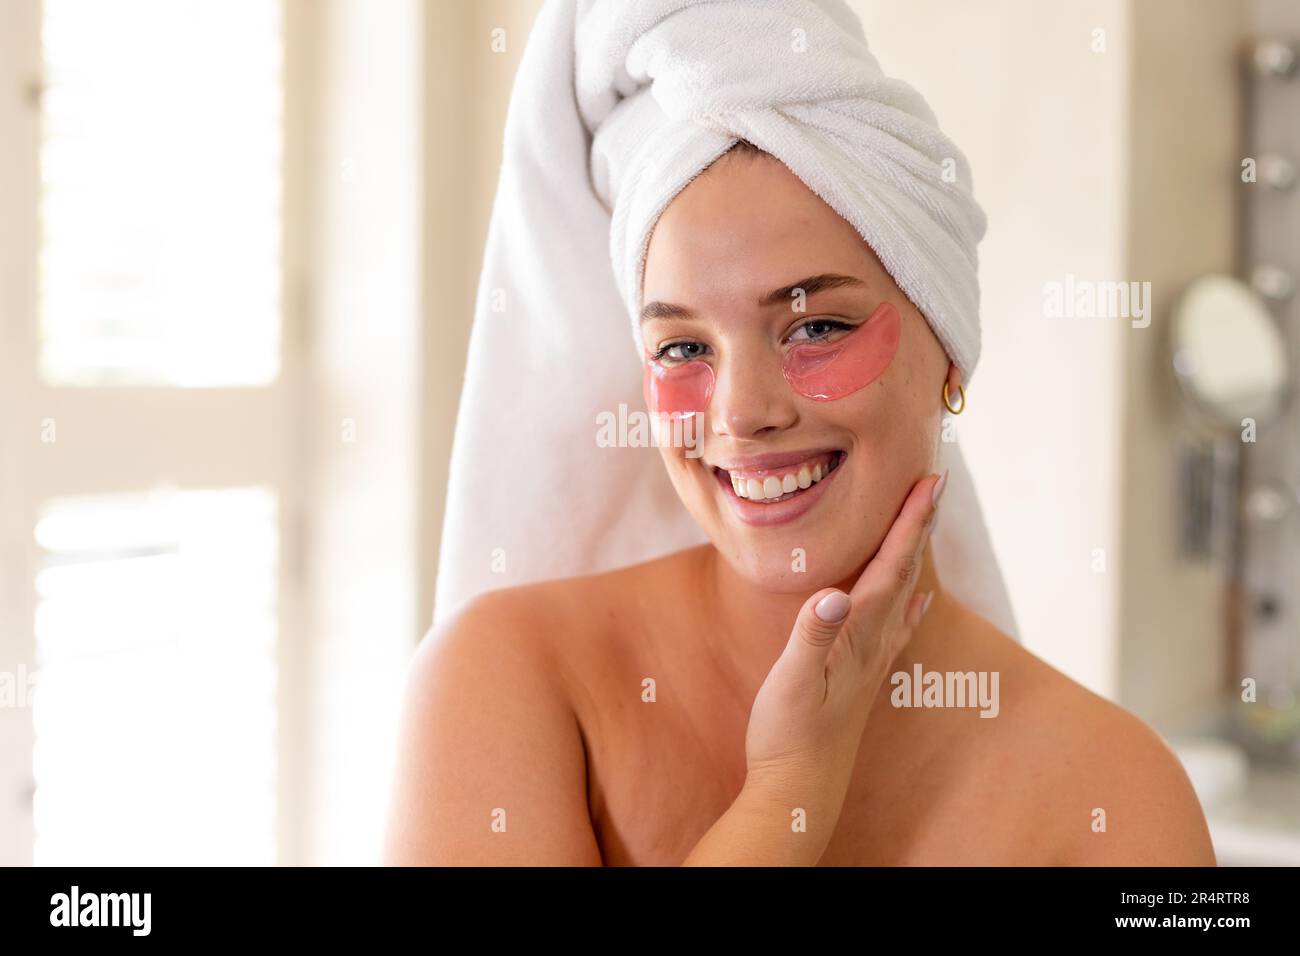 Beautiful young woman's back after shower with red towel Stock Photo